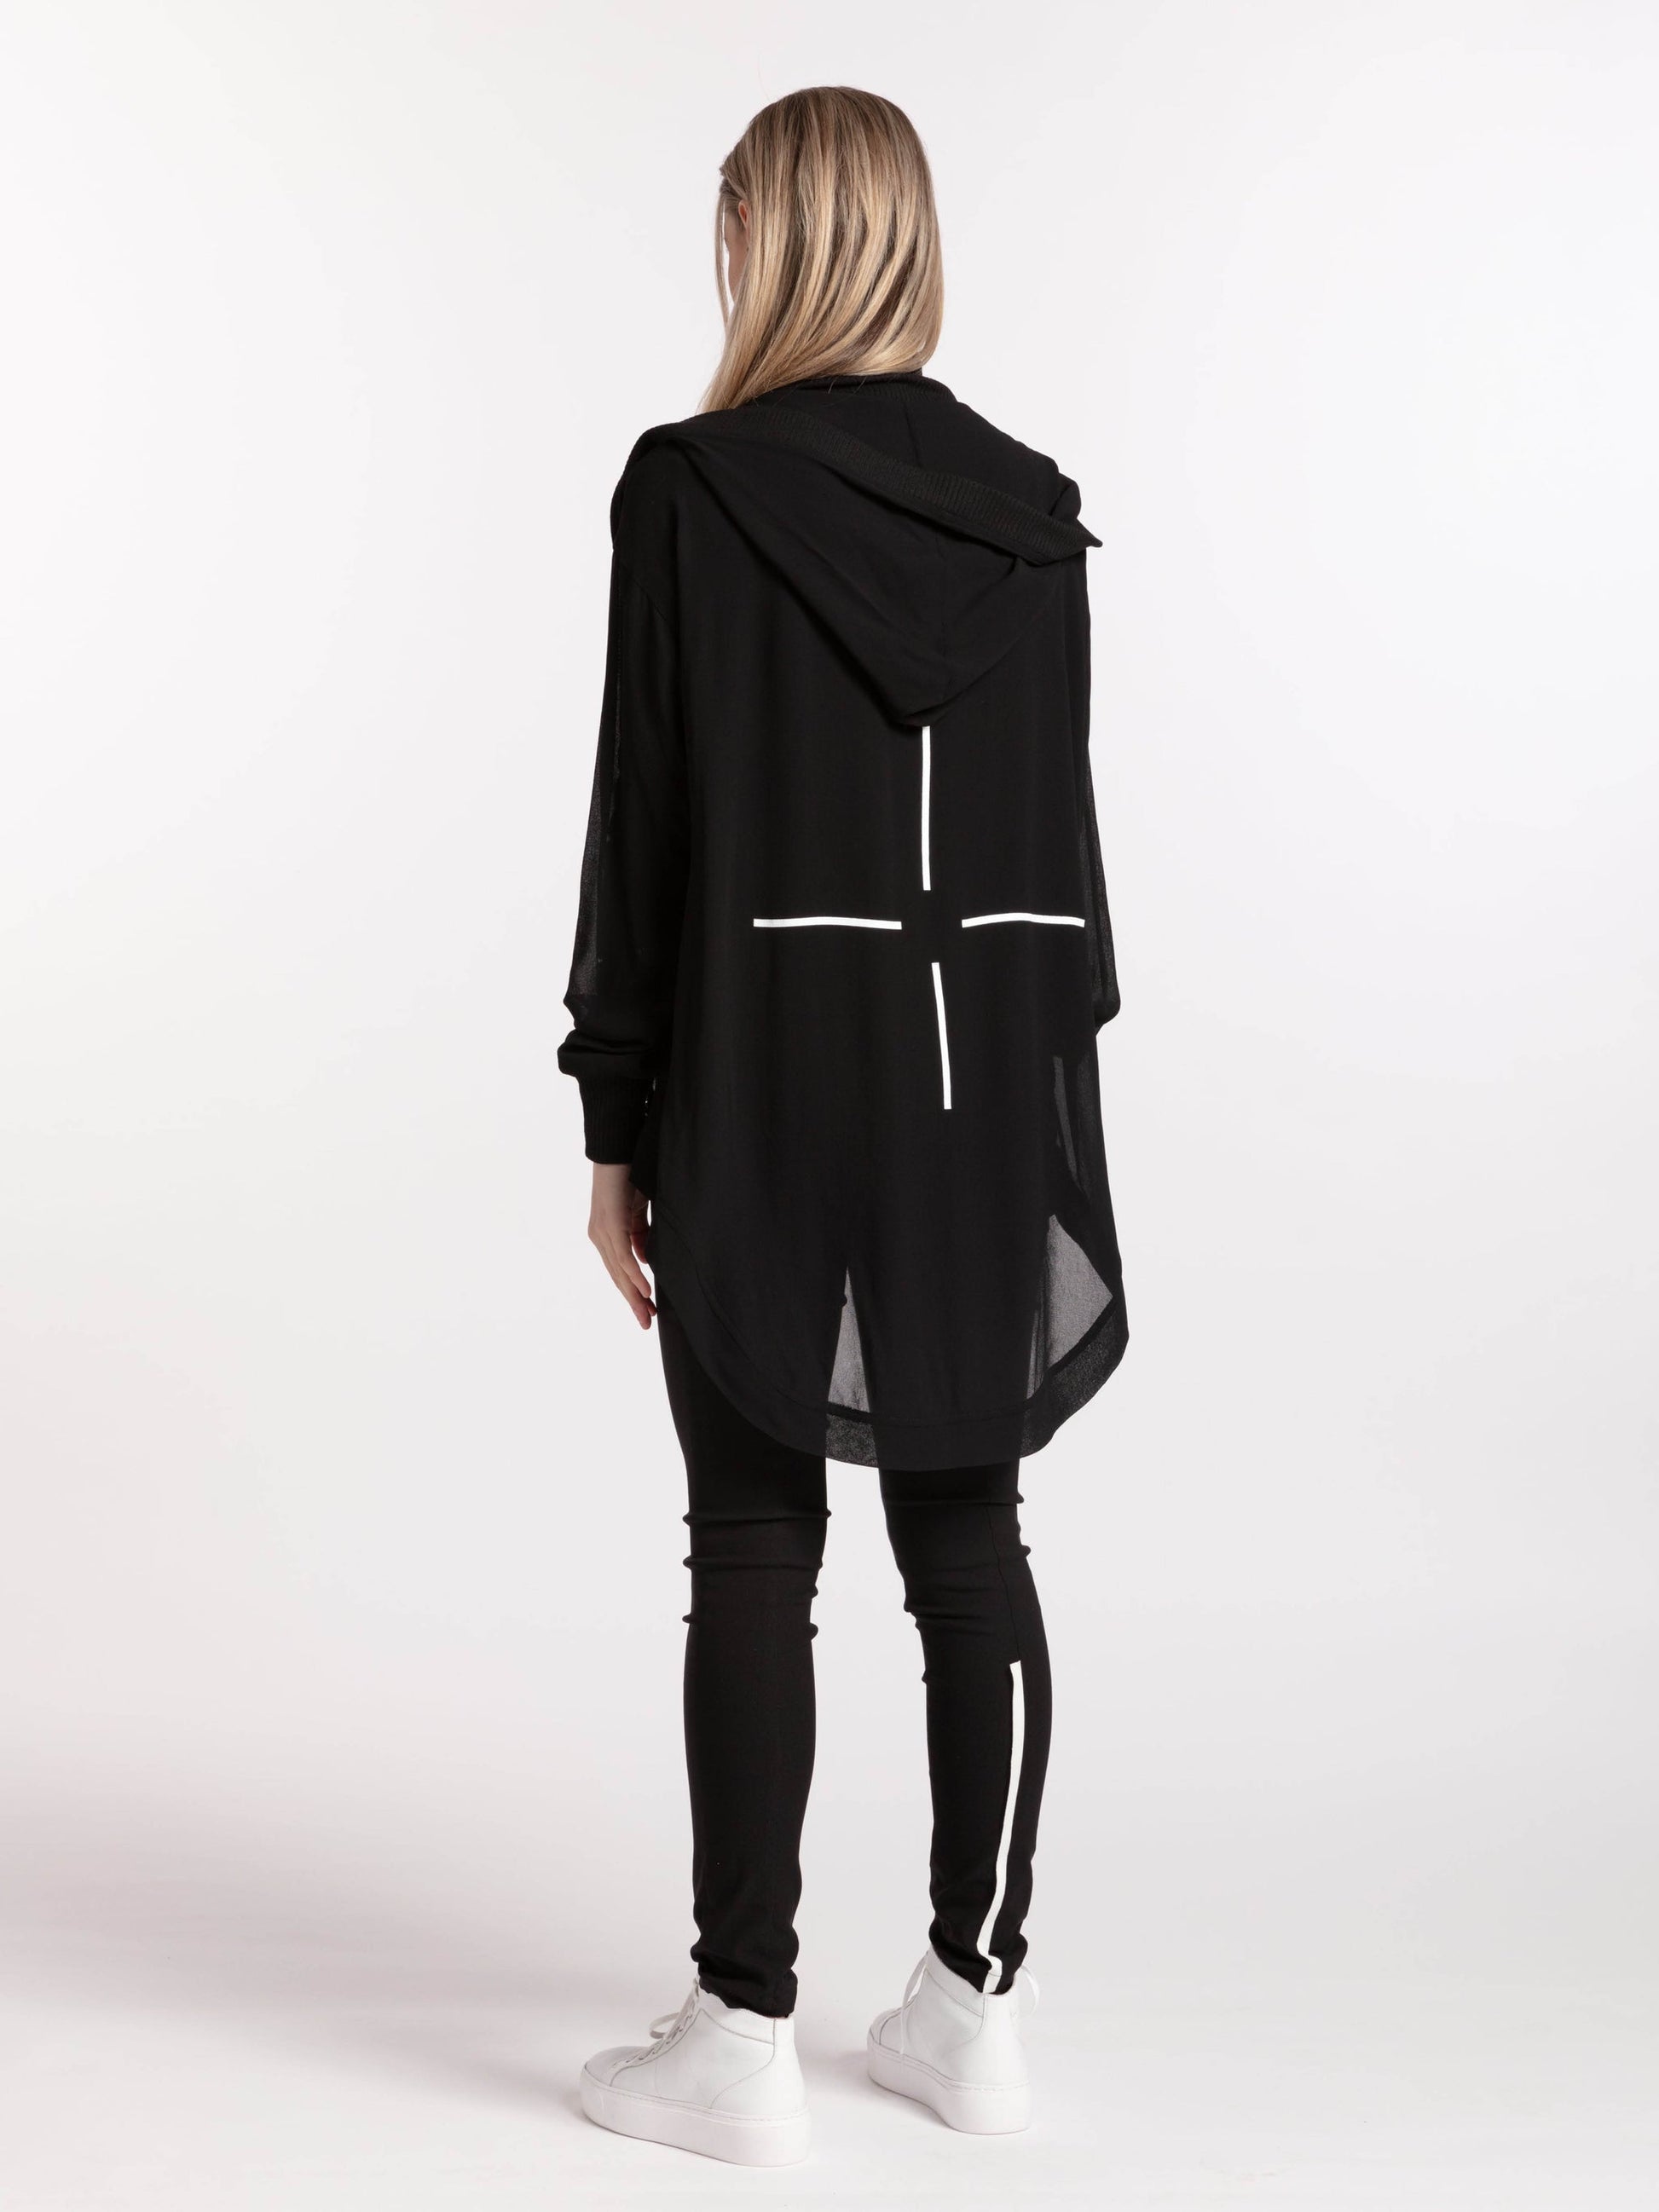 STYLE X LAB STARGAZING ZIP HOODED JACKET - BLACK - THE VOGUE STORE